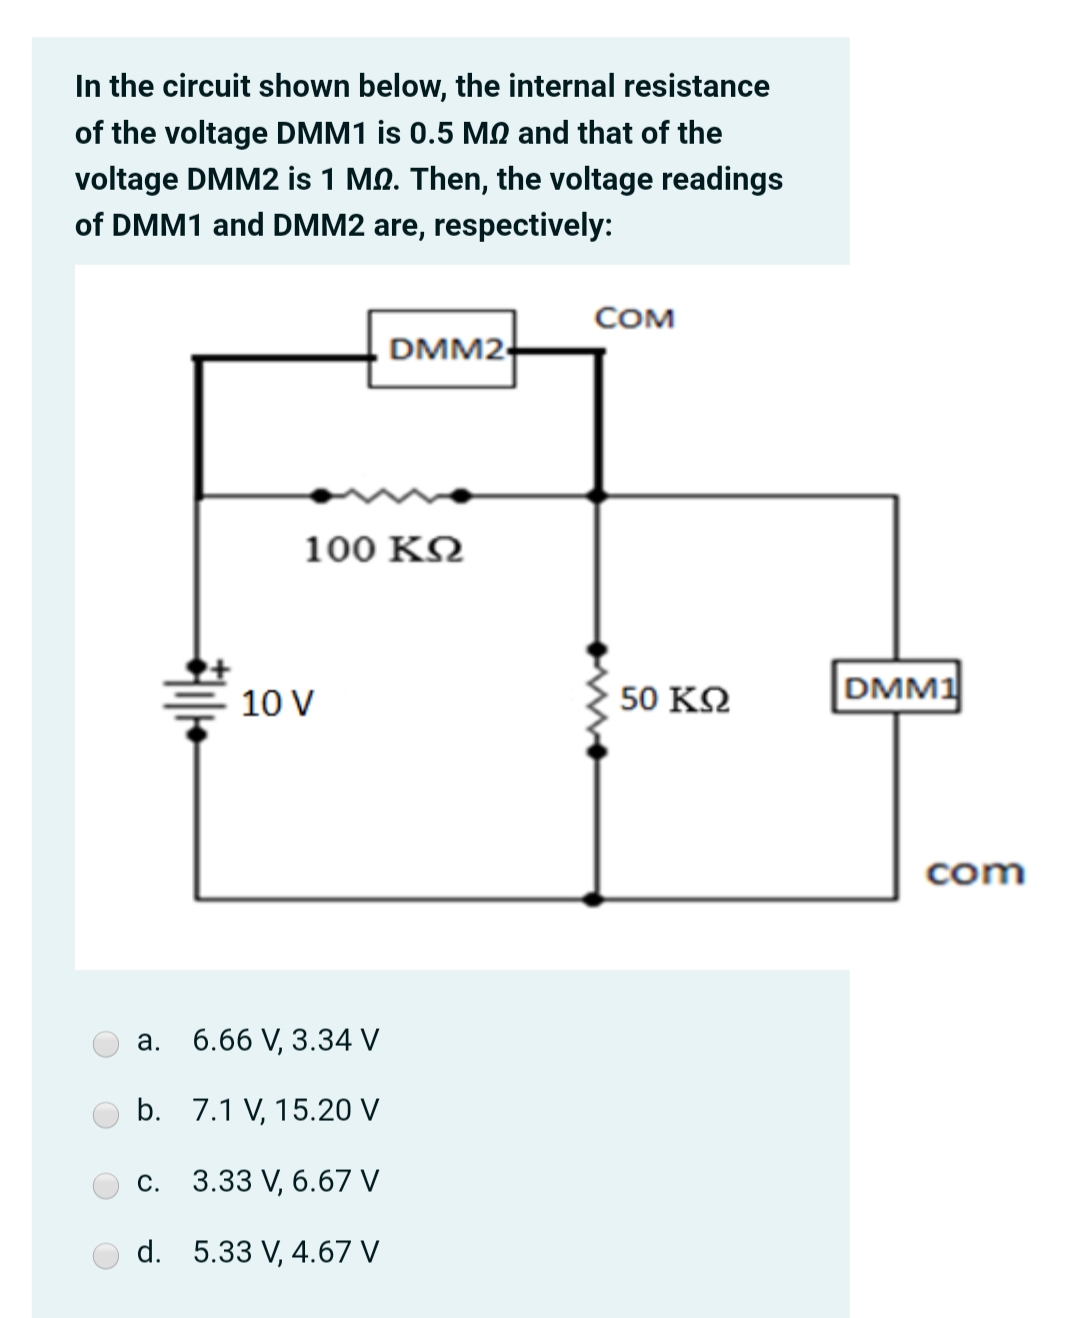 In the circuit shown below, the internal resistance
of the voltage DMM1 is 0.5 MQ and that of the
voltage DMM2 is 1 MQ. Then, the voltage readings
of DMM1 and DMM2 are, respectively:
COM
DMM2
100 ΚΩ
10 V
50 ΚΩ
DMM1
com
a. 6.66 V, 3.34 V
b. 7.1 V, 15.20 V
3.33 V, 6.67 V
С.
d. 5.33 V, 4.67 V
